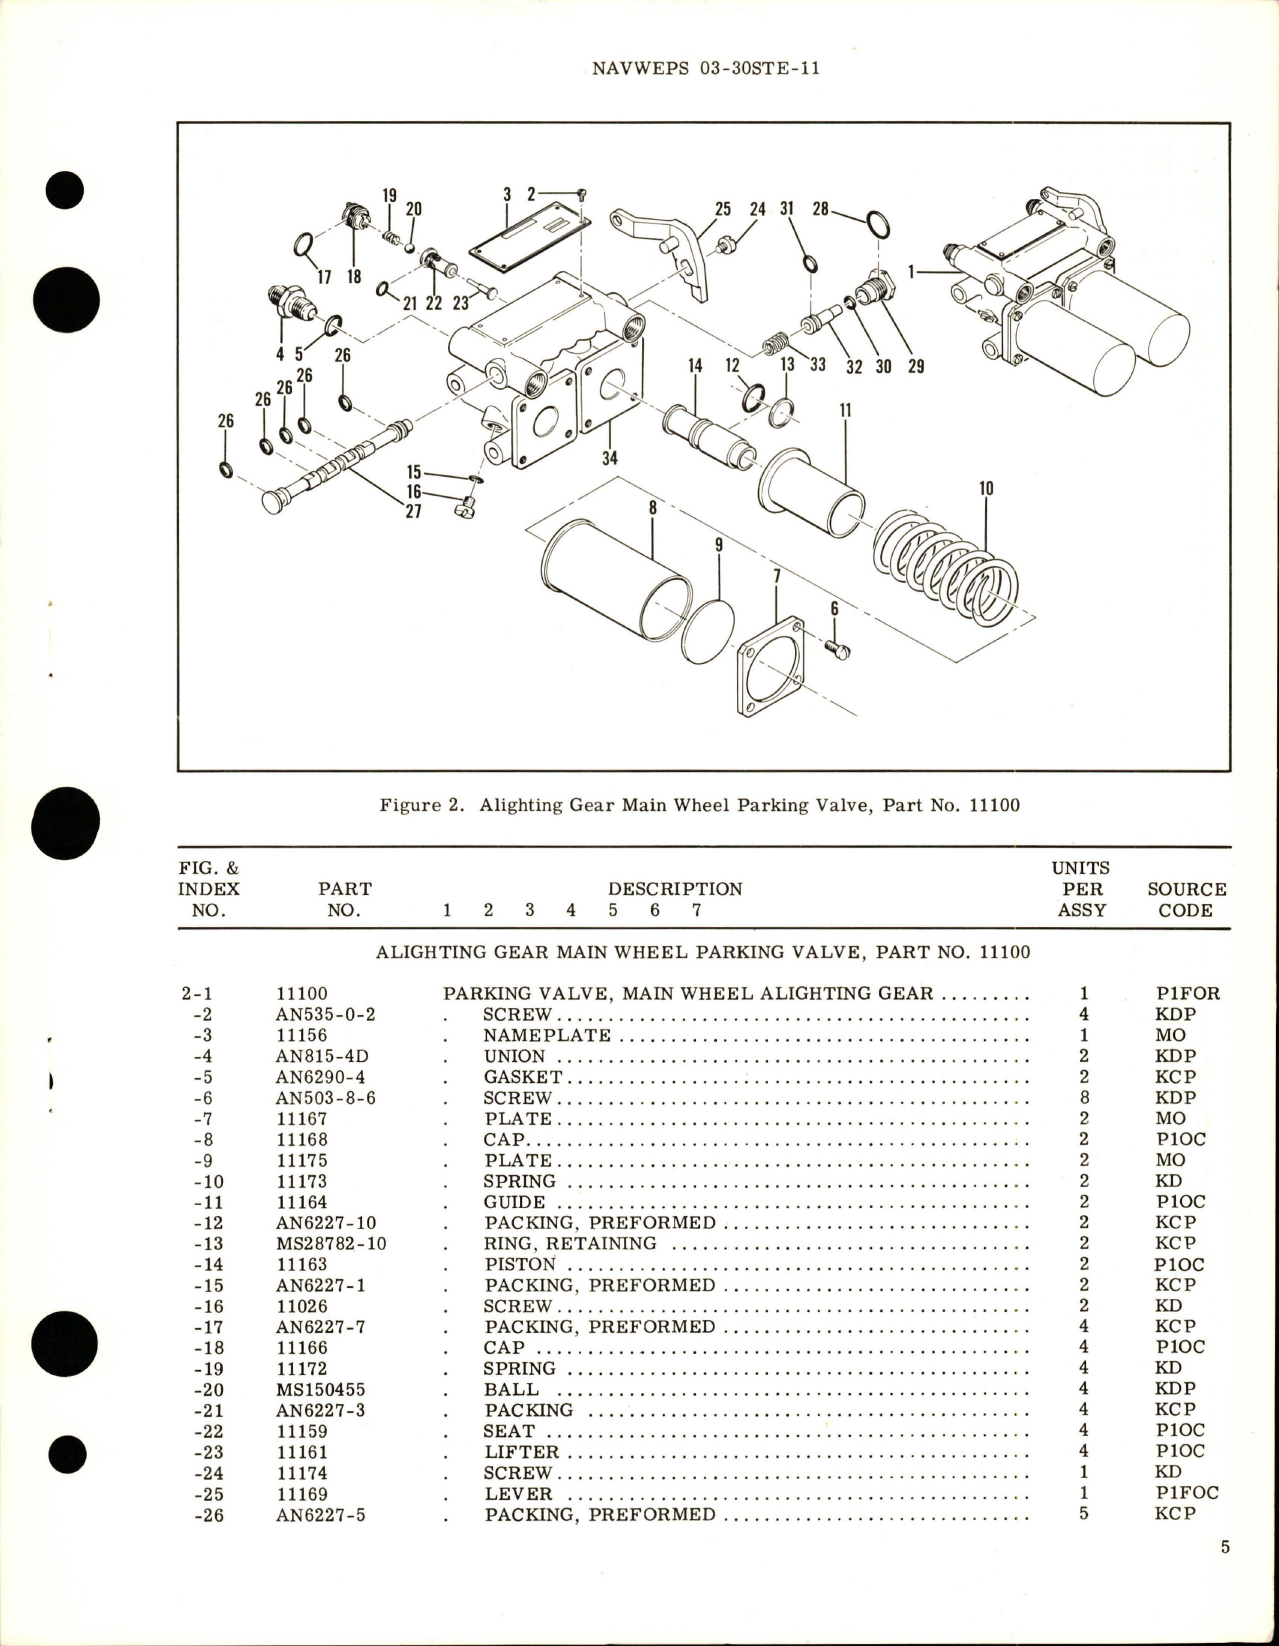 Sample page 5 from AirCorps Library document: Overhaul Instructions with Parts Breakdown for Alighting Gear Main Wheel Parking Valve - Part 11100